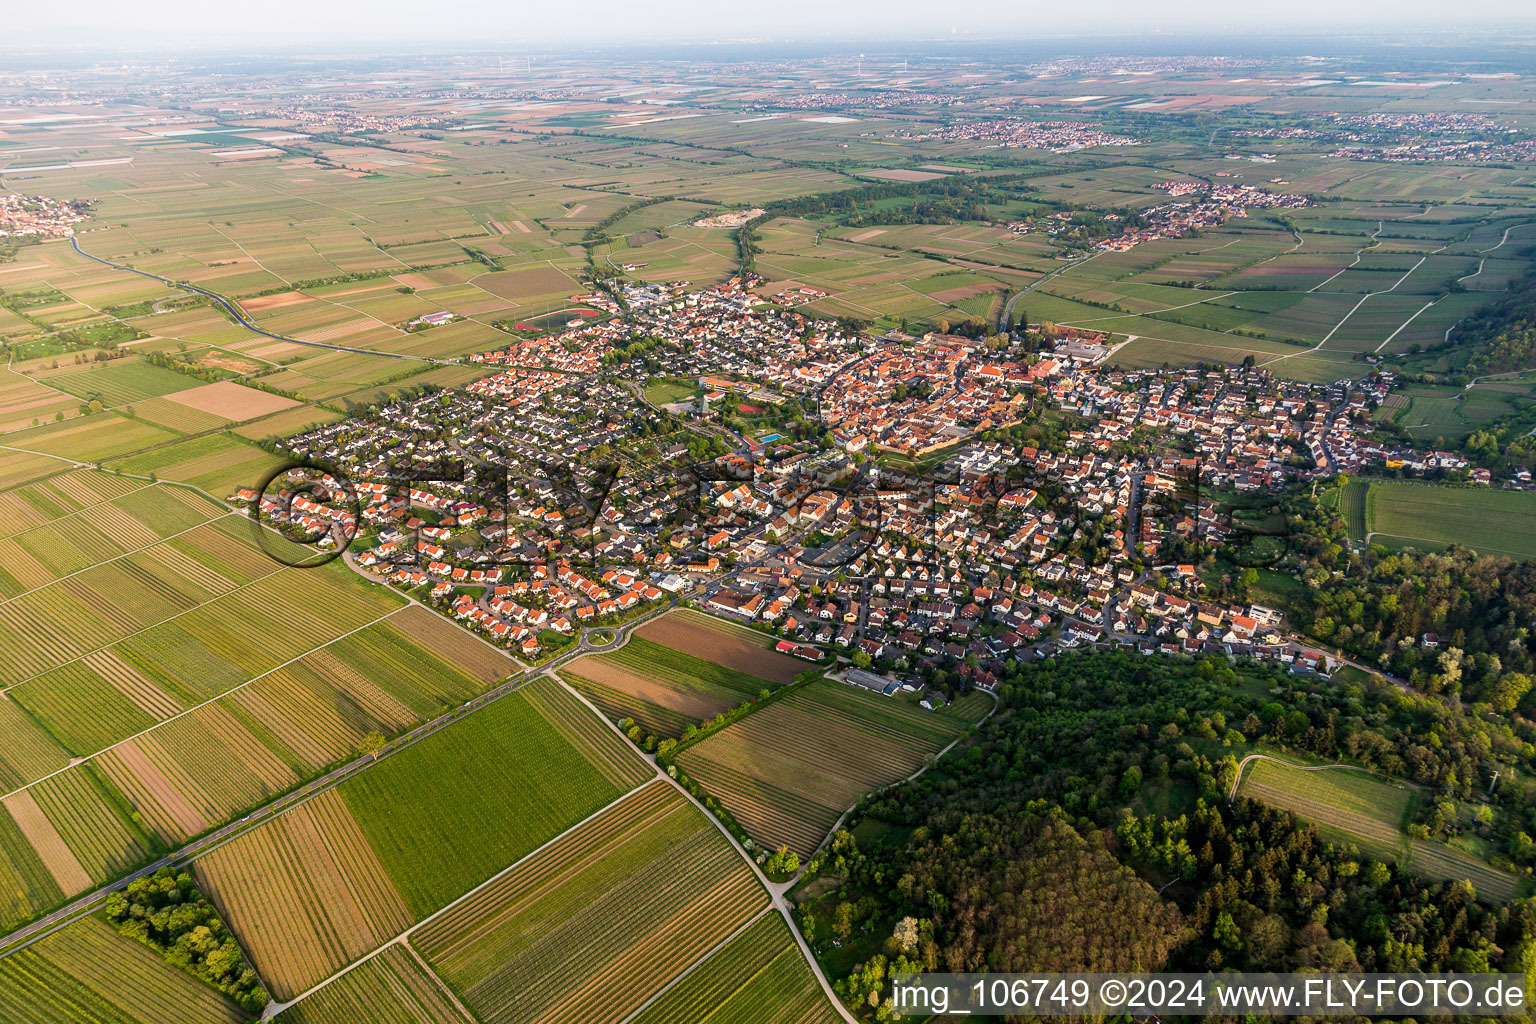 Aerial view of Village view on the edge of agricultural fields and land in Wachenheim an der Weinstrasse in the state Rhineland-Palatinate, Germany